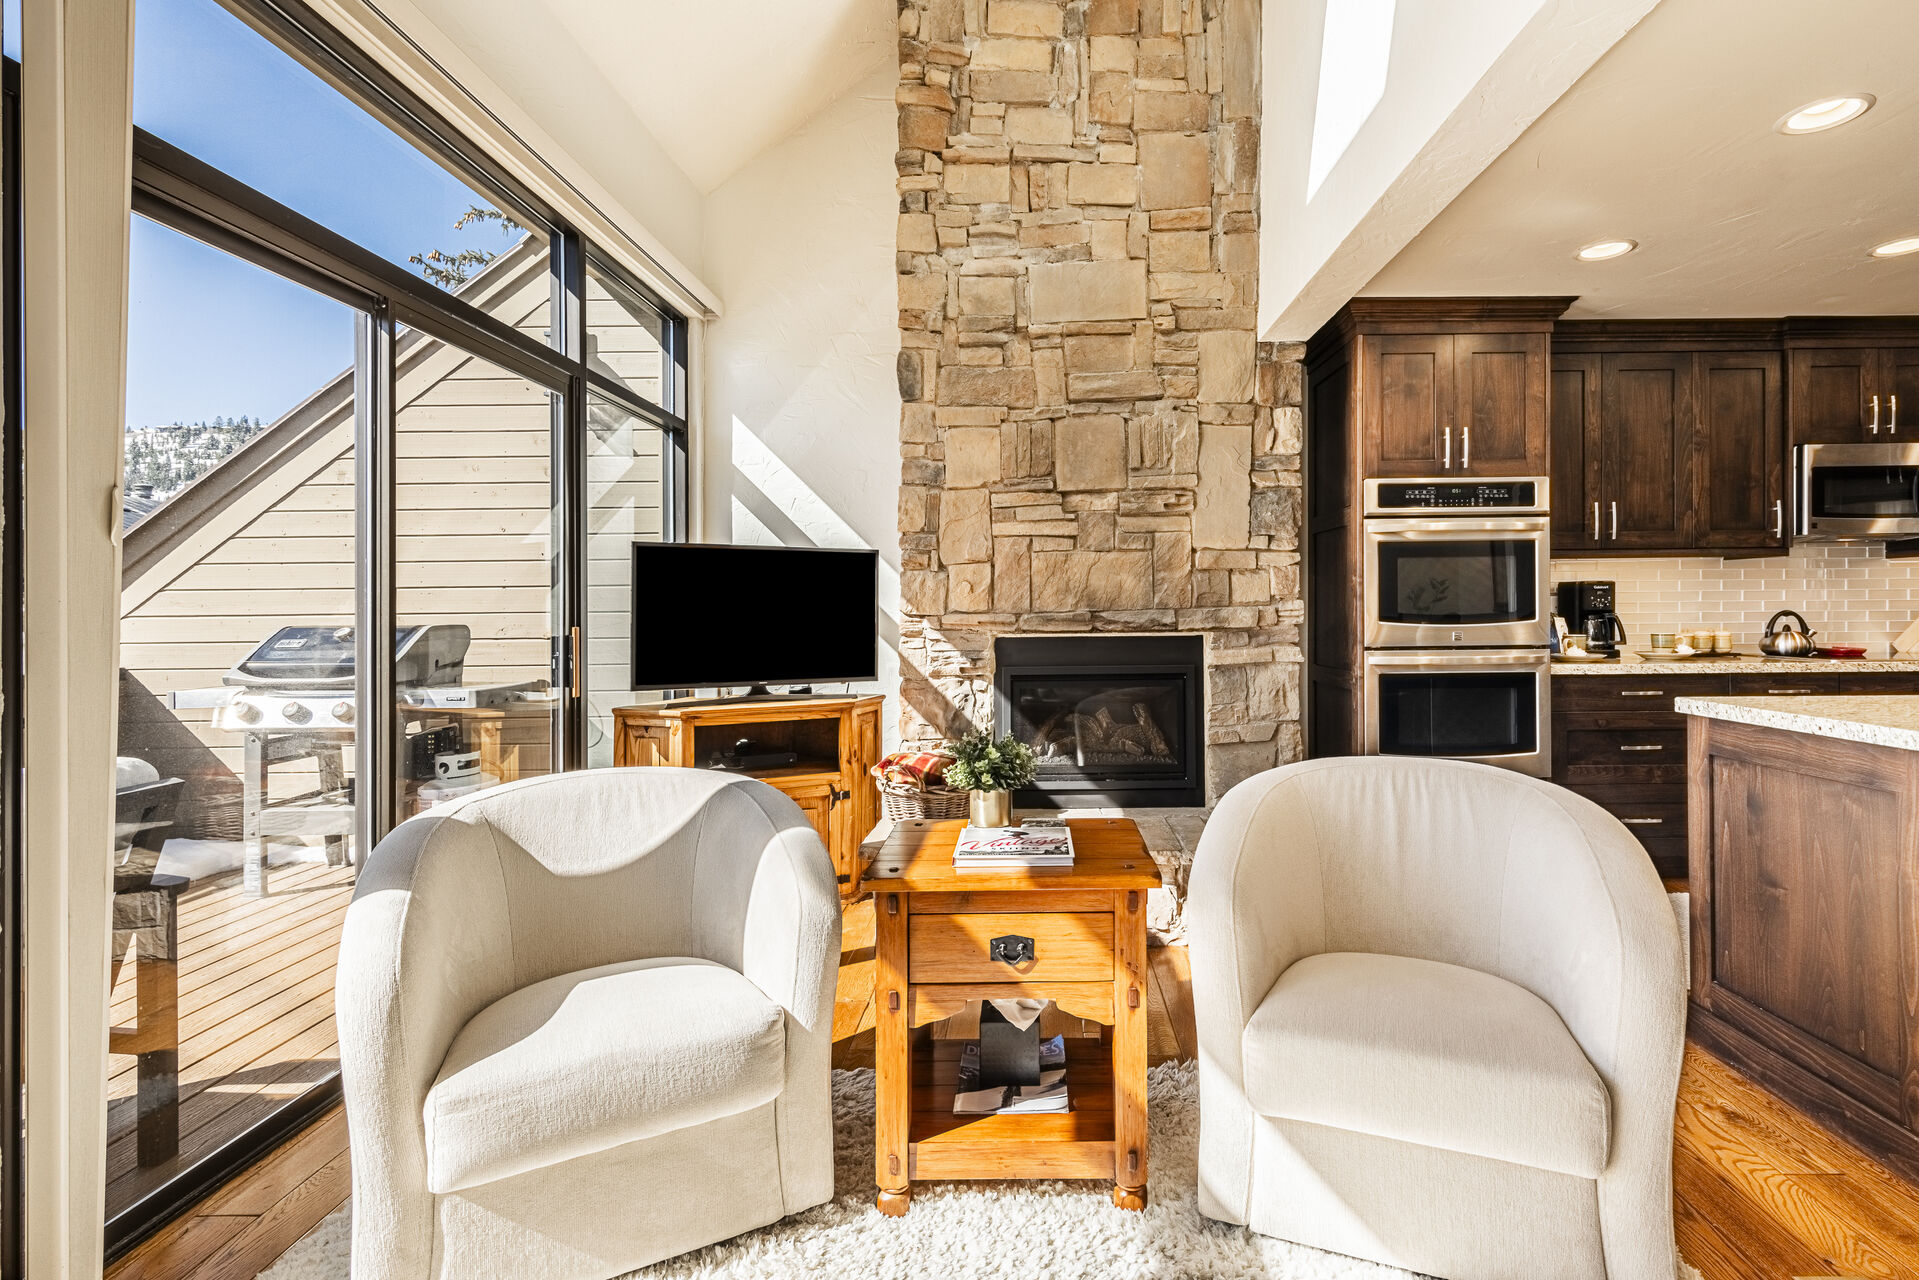 Warm gas fireplace and Smart TV